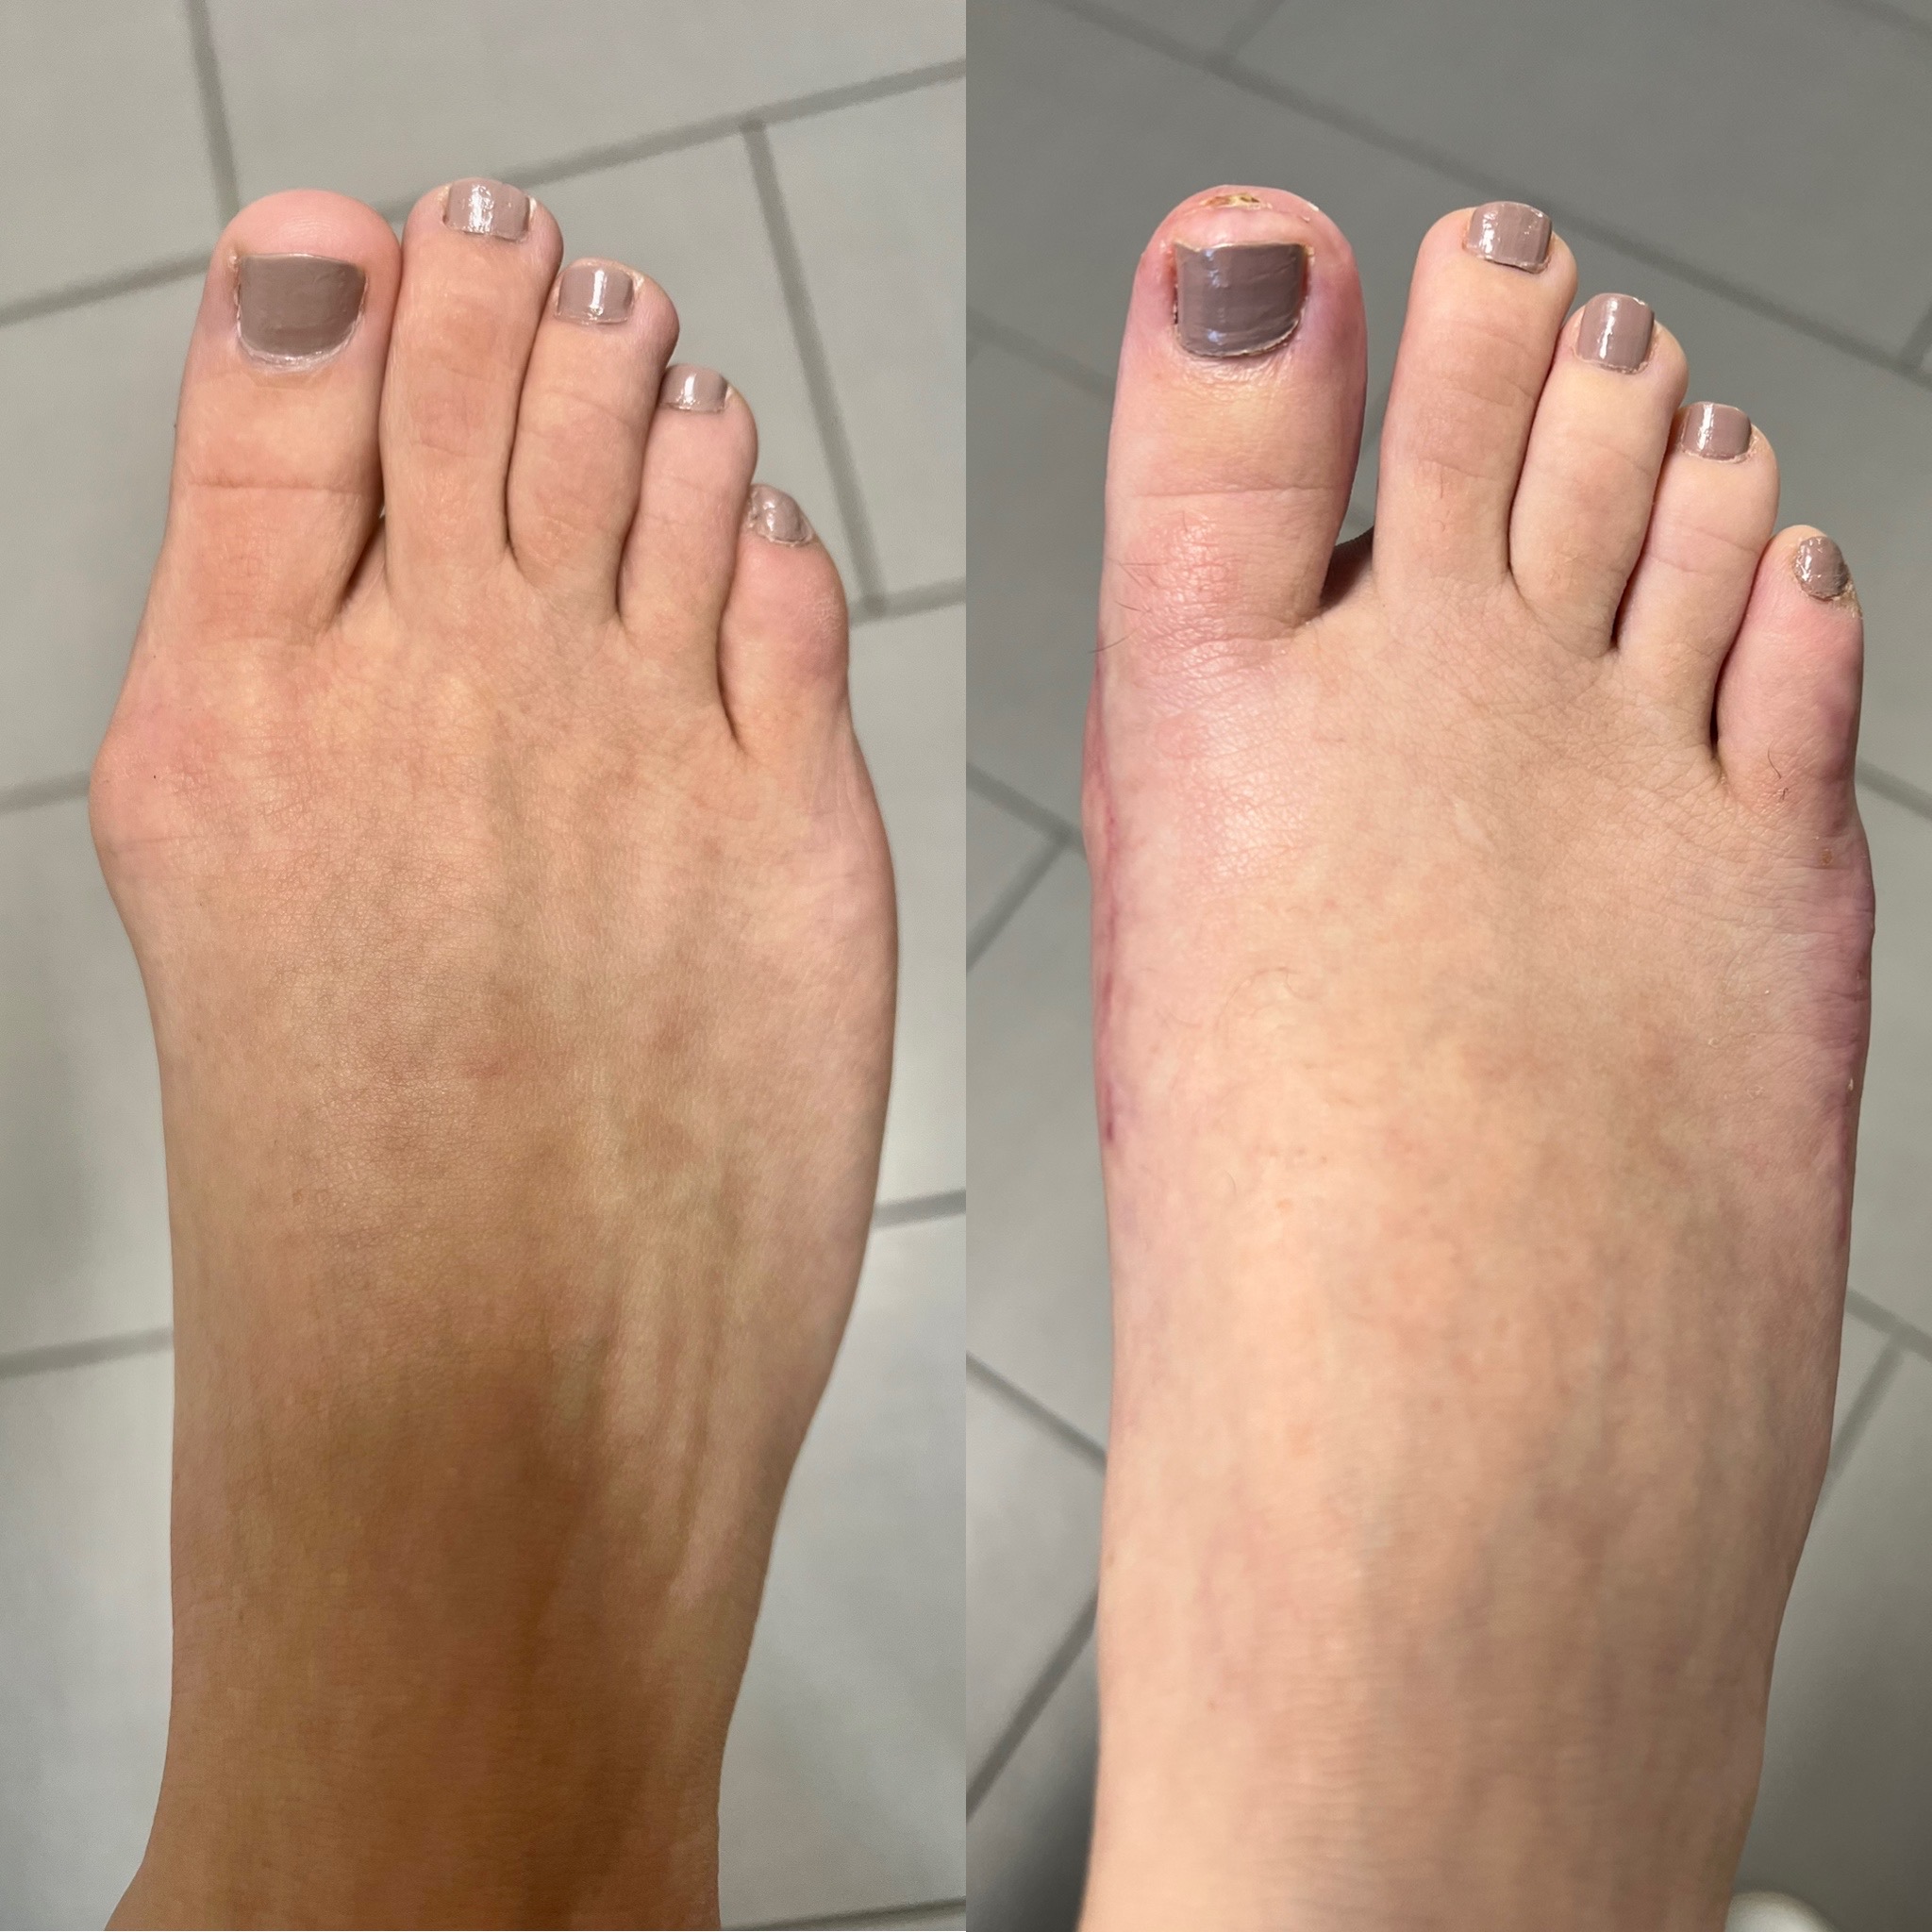 SURGERY FOR WIDE FEET? WAIT UNTIL YOU SEE THIS !!! (BEFORE & AFTER